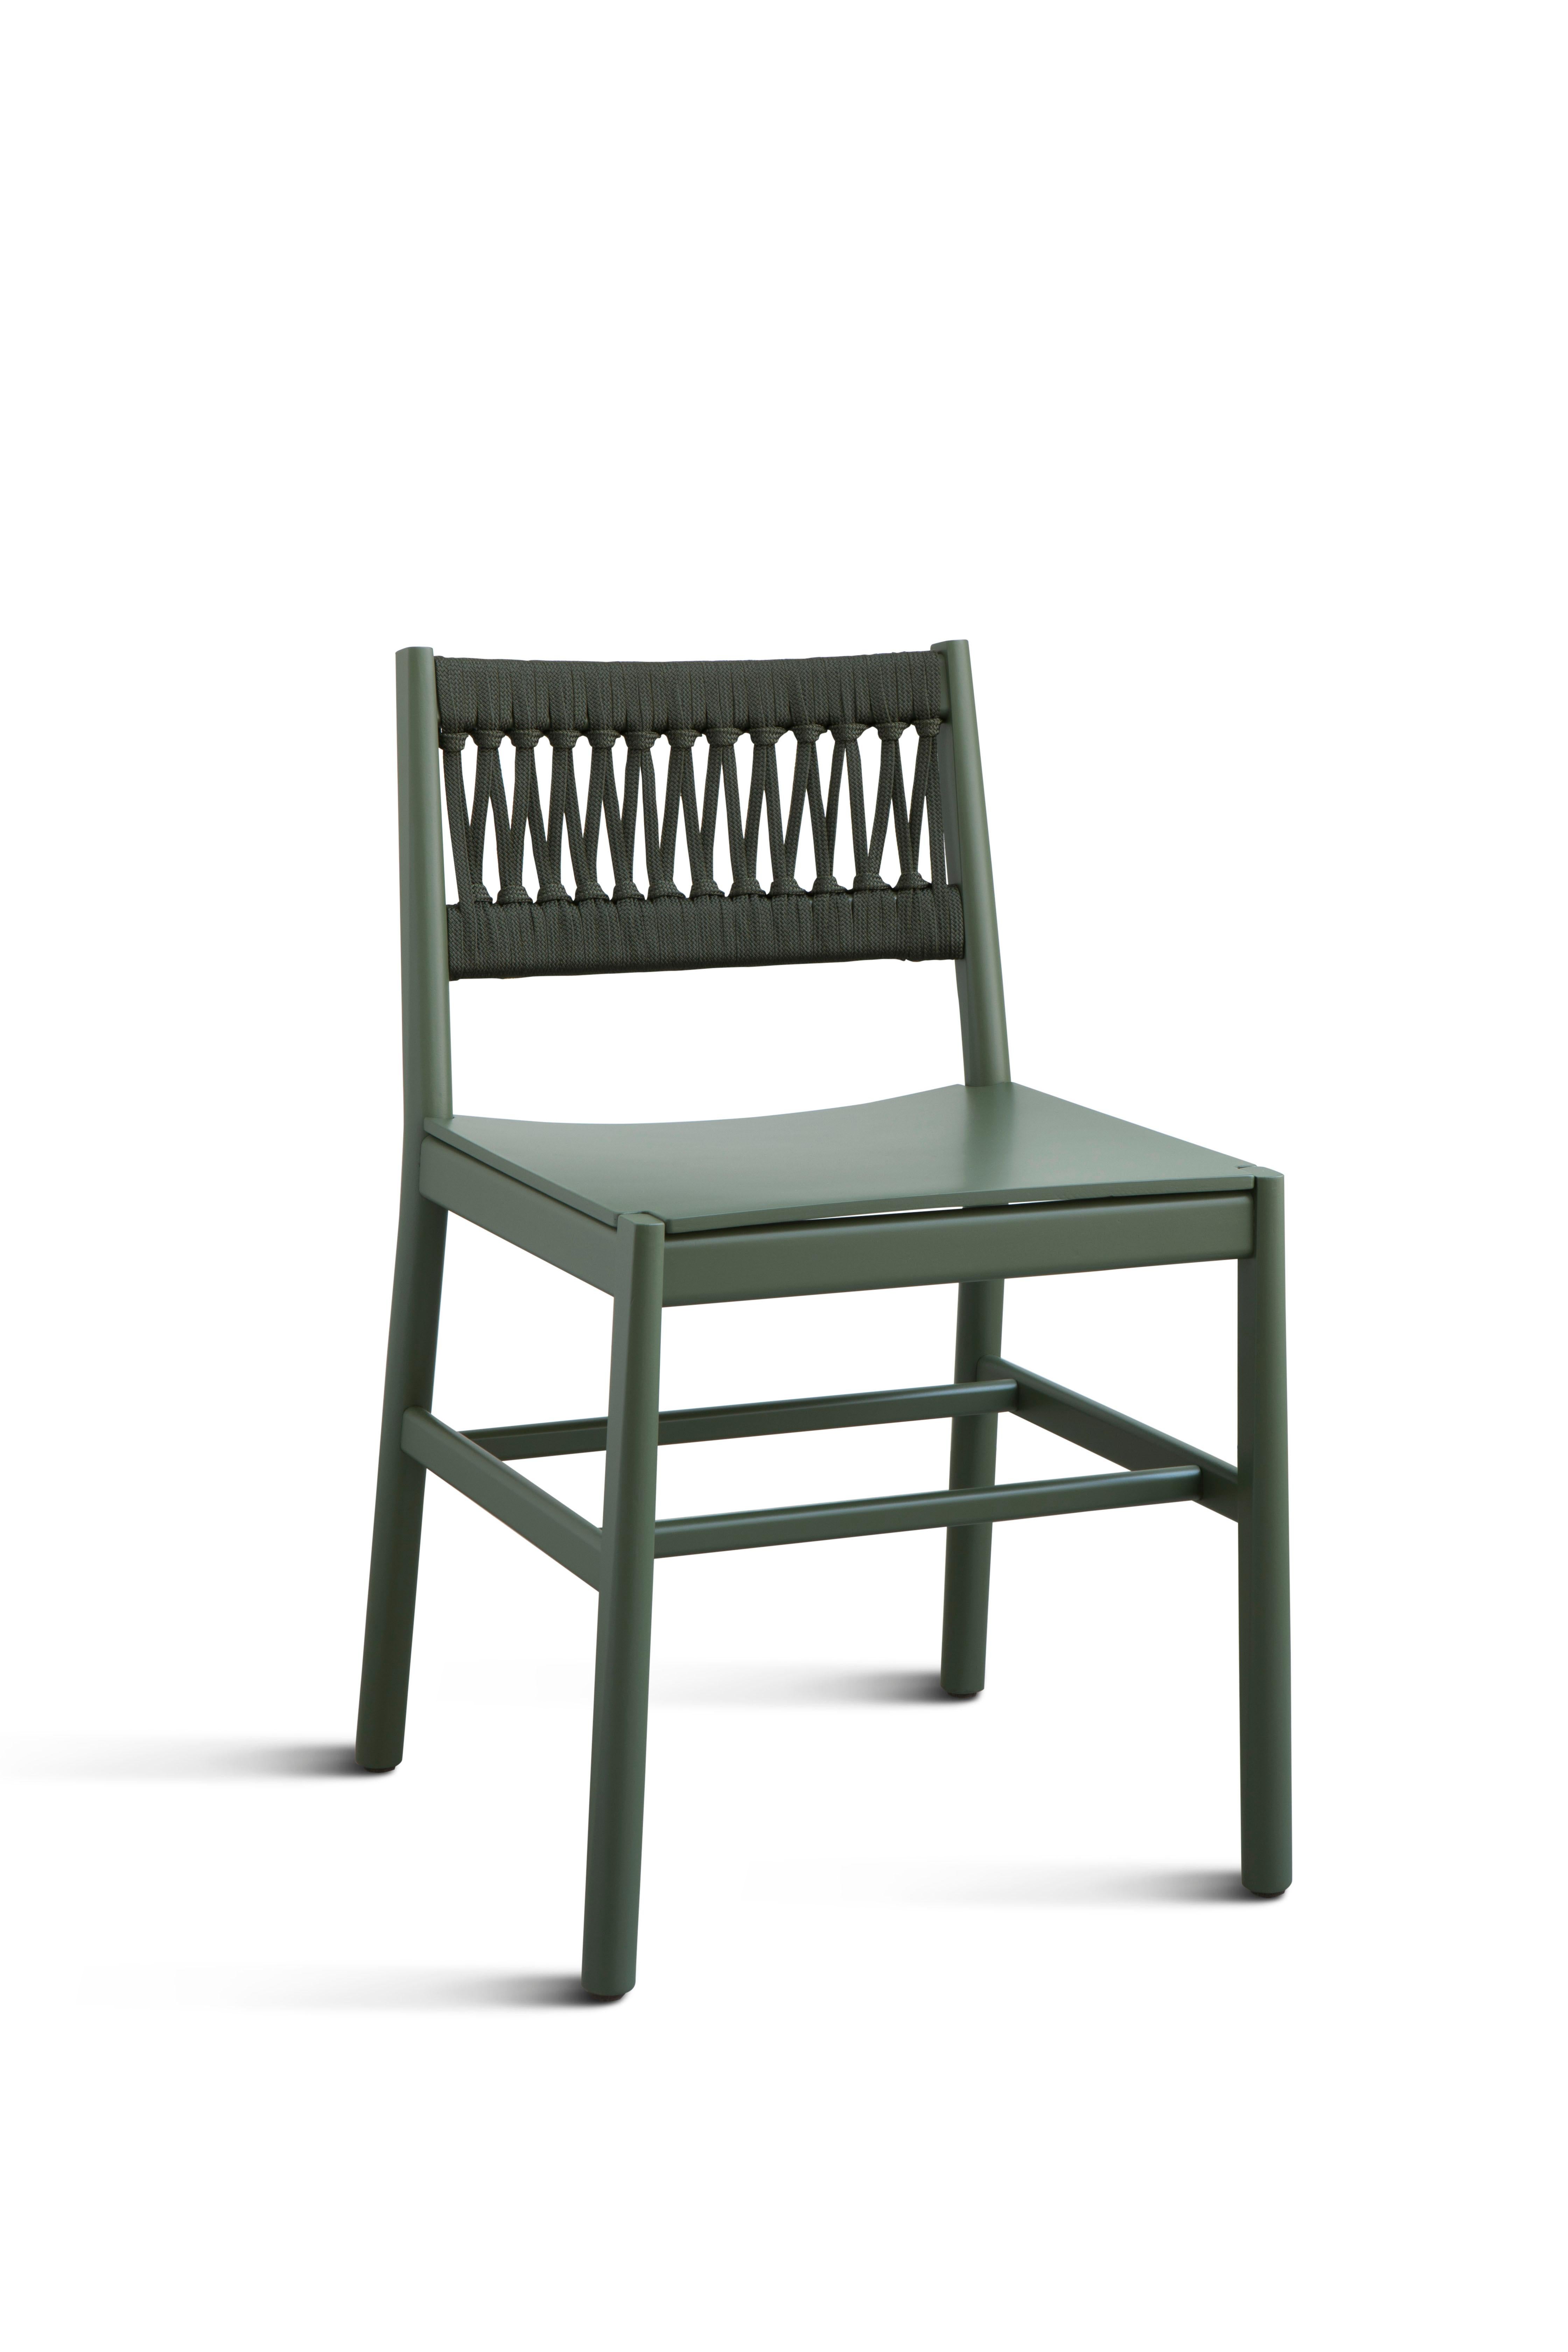 Contemporary Chair Art 024-IN Beechwood Painted Green and Back in Color Rope by Emilio Nanni For Sale